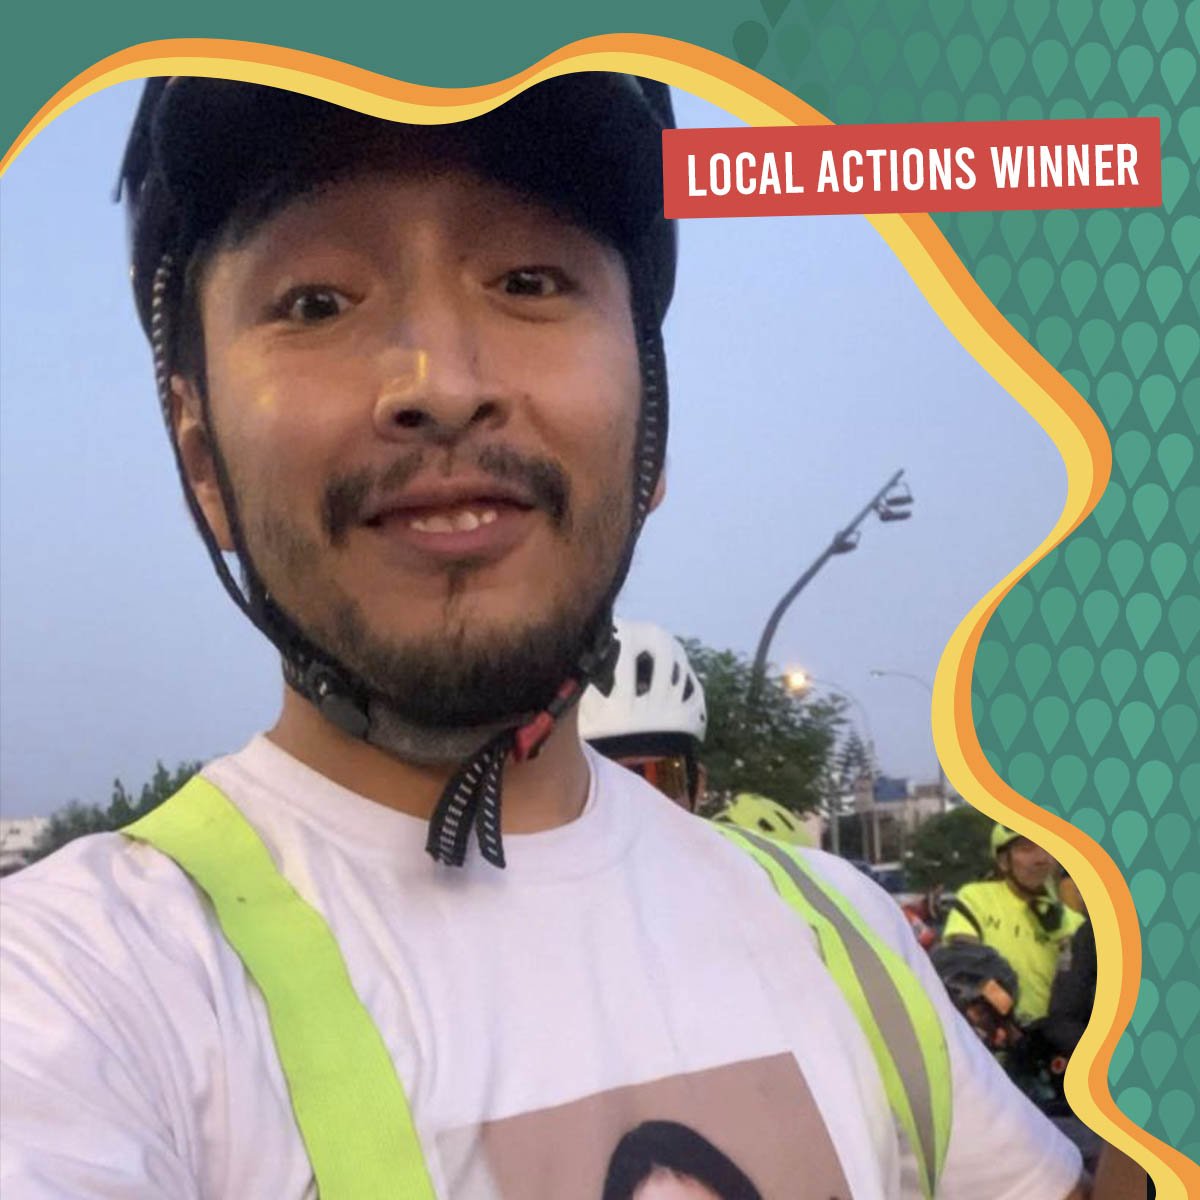 Jeffrey Leandro (Peru) is an environmental advocate and biologist 🌱 His project, Pedalea Seguro, aims to revolutionize Lima, Peru's urban landscape by promoting cycling as a safe, efficient, and preferred mode of transportation. Read more: claimingourspace.org/pedalea-seguro